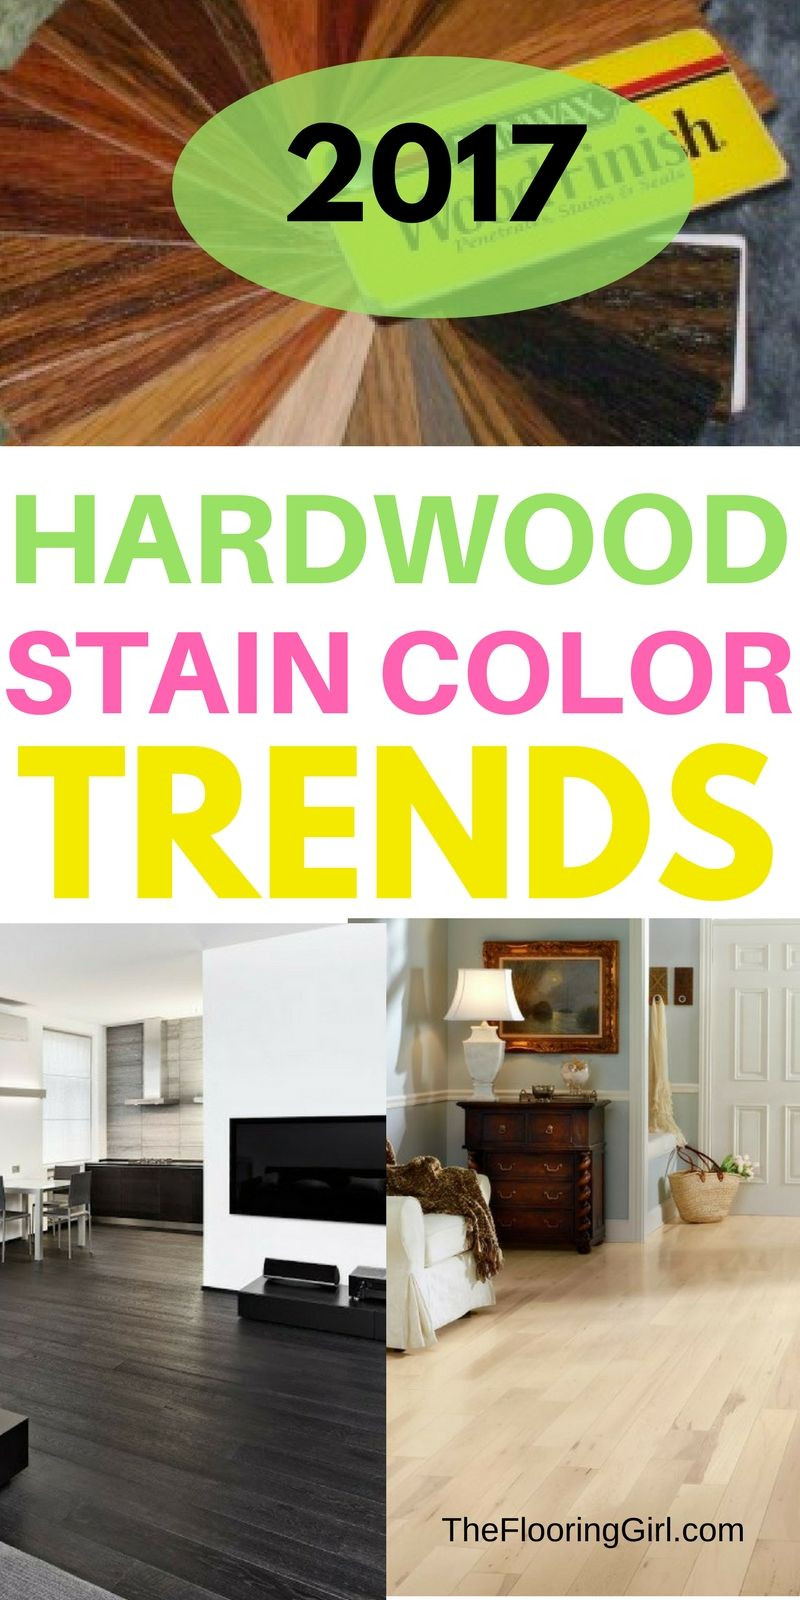 23 Ideal How to Restore Hardwood Floors Yourself 2024 free download how to restore hardwood floors yourself of hardwood flooring stain color trends 2018 more from the flooring inside hardwood flooring stain color trends for 2017 hardwood colors that are in s